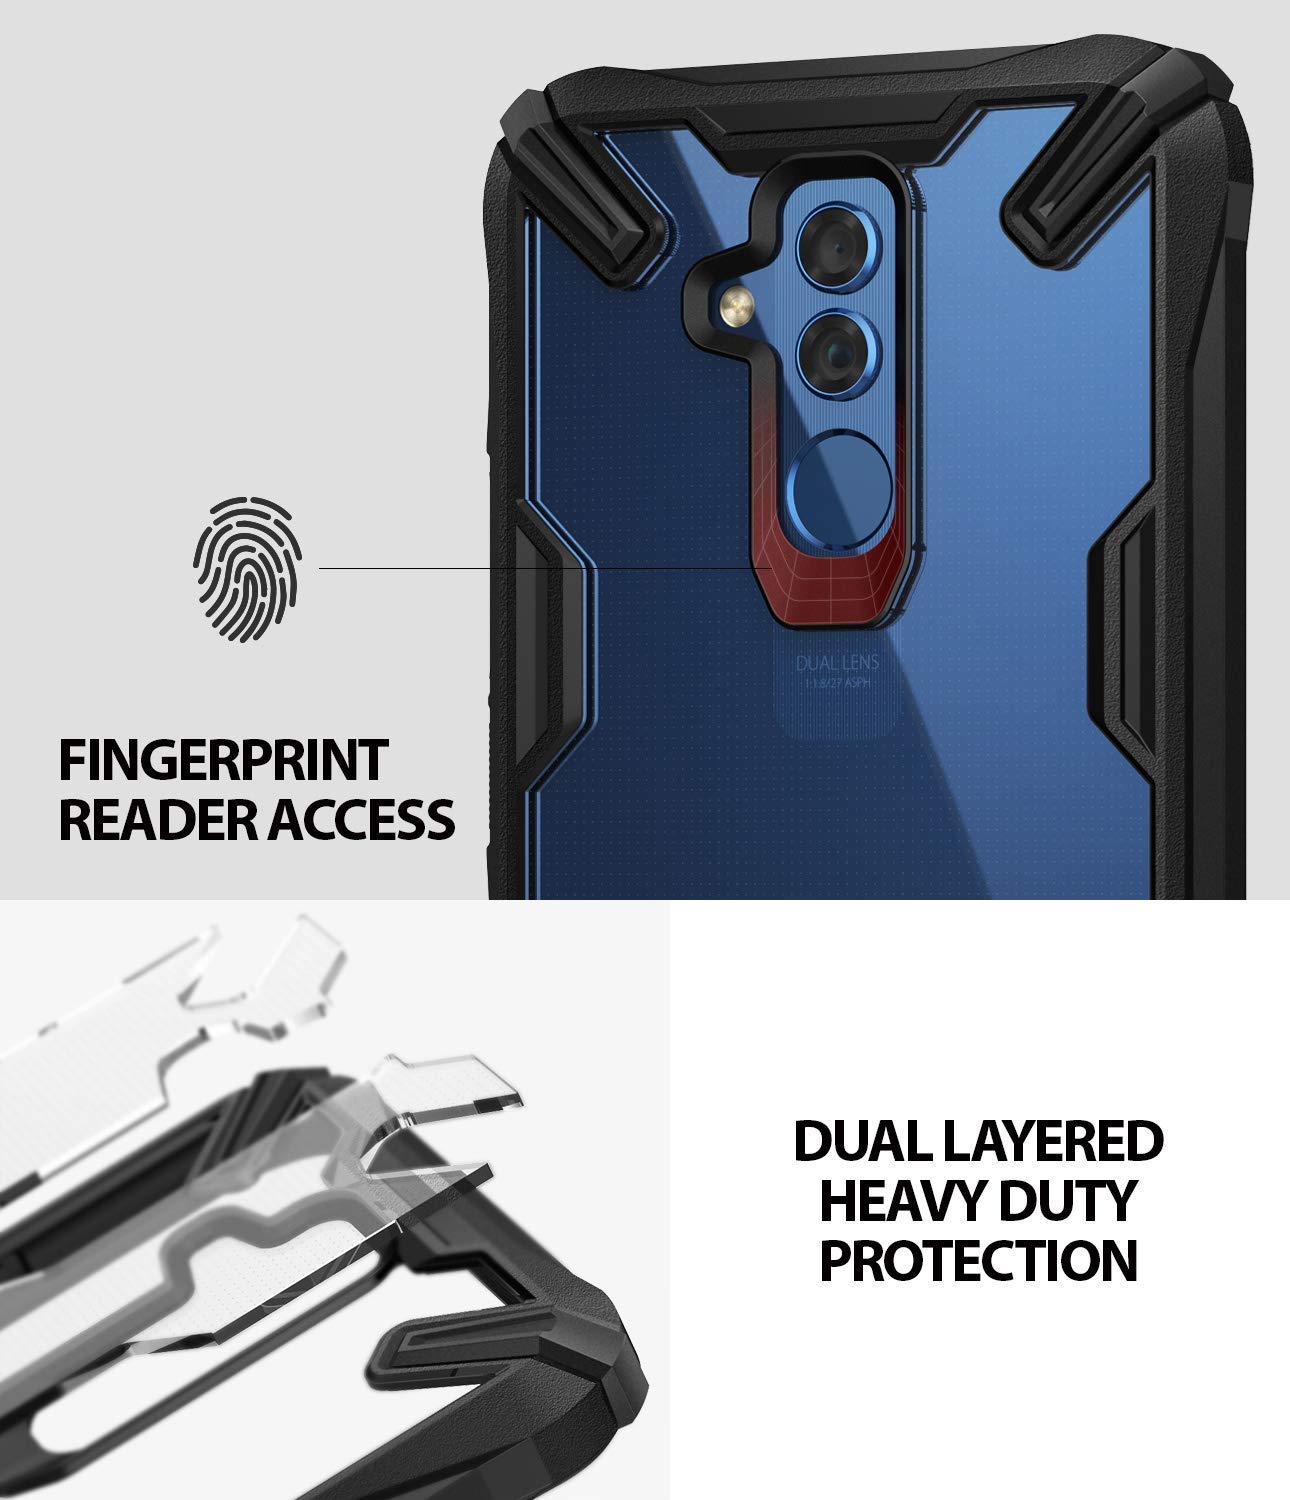 easy fingerprint reader access with dual layered heavy duty protection